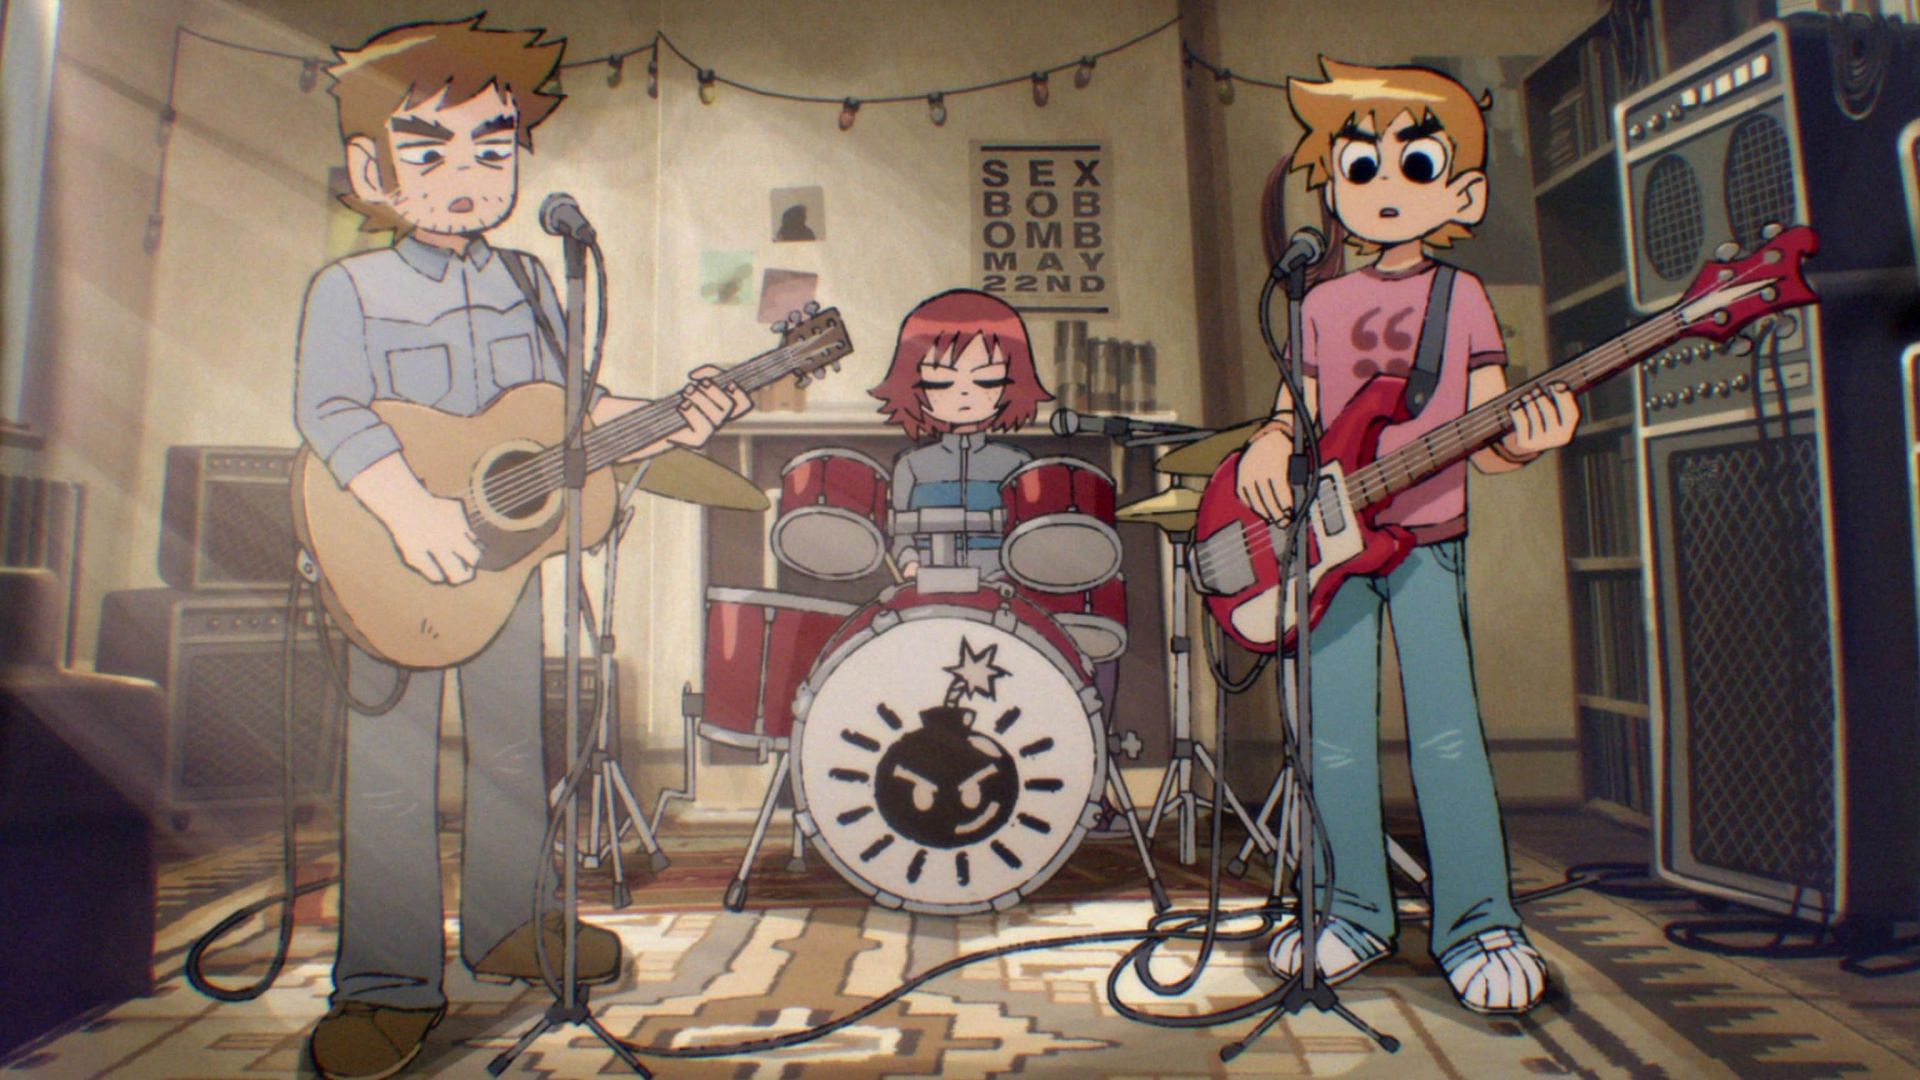 Scott Pilgrim Takes Off': What to Watch Next From the Science Saru Team